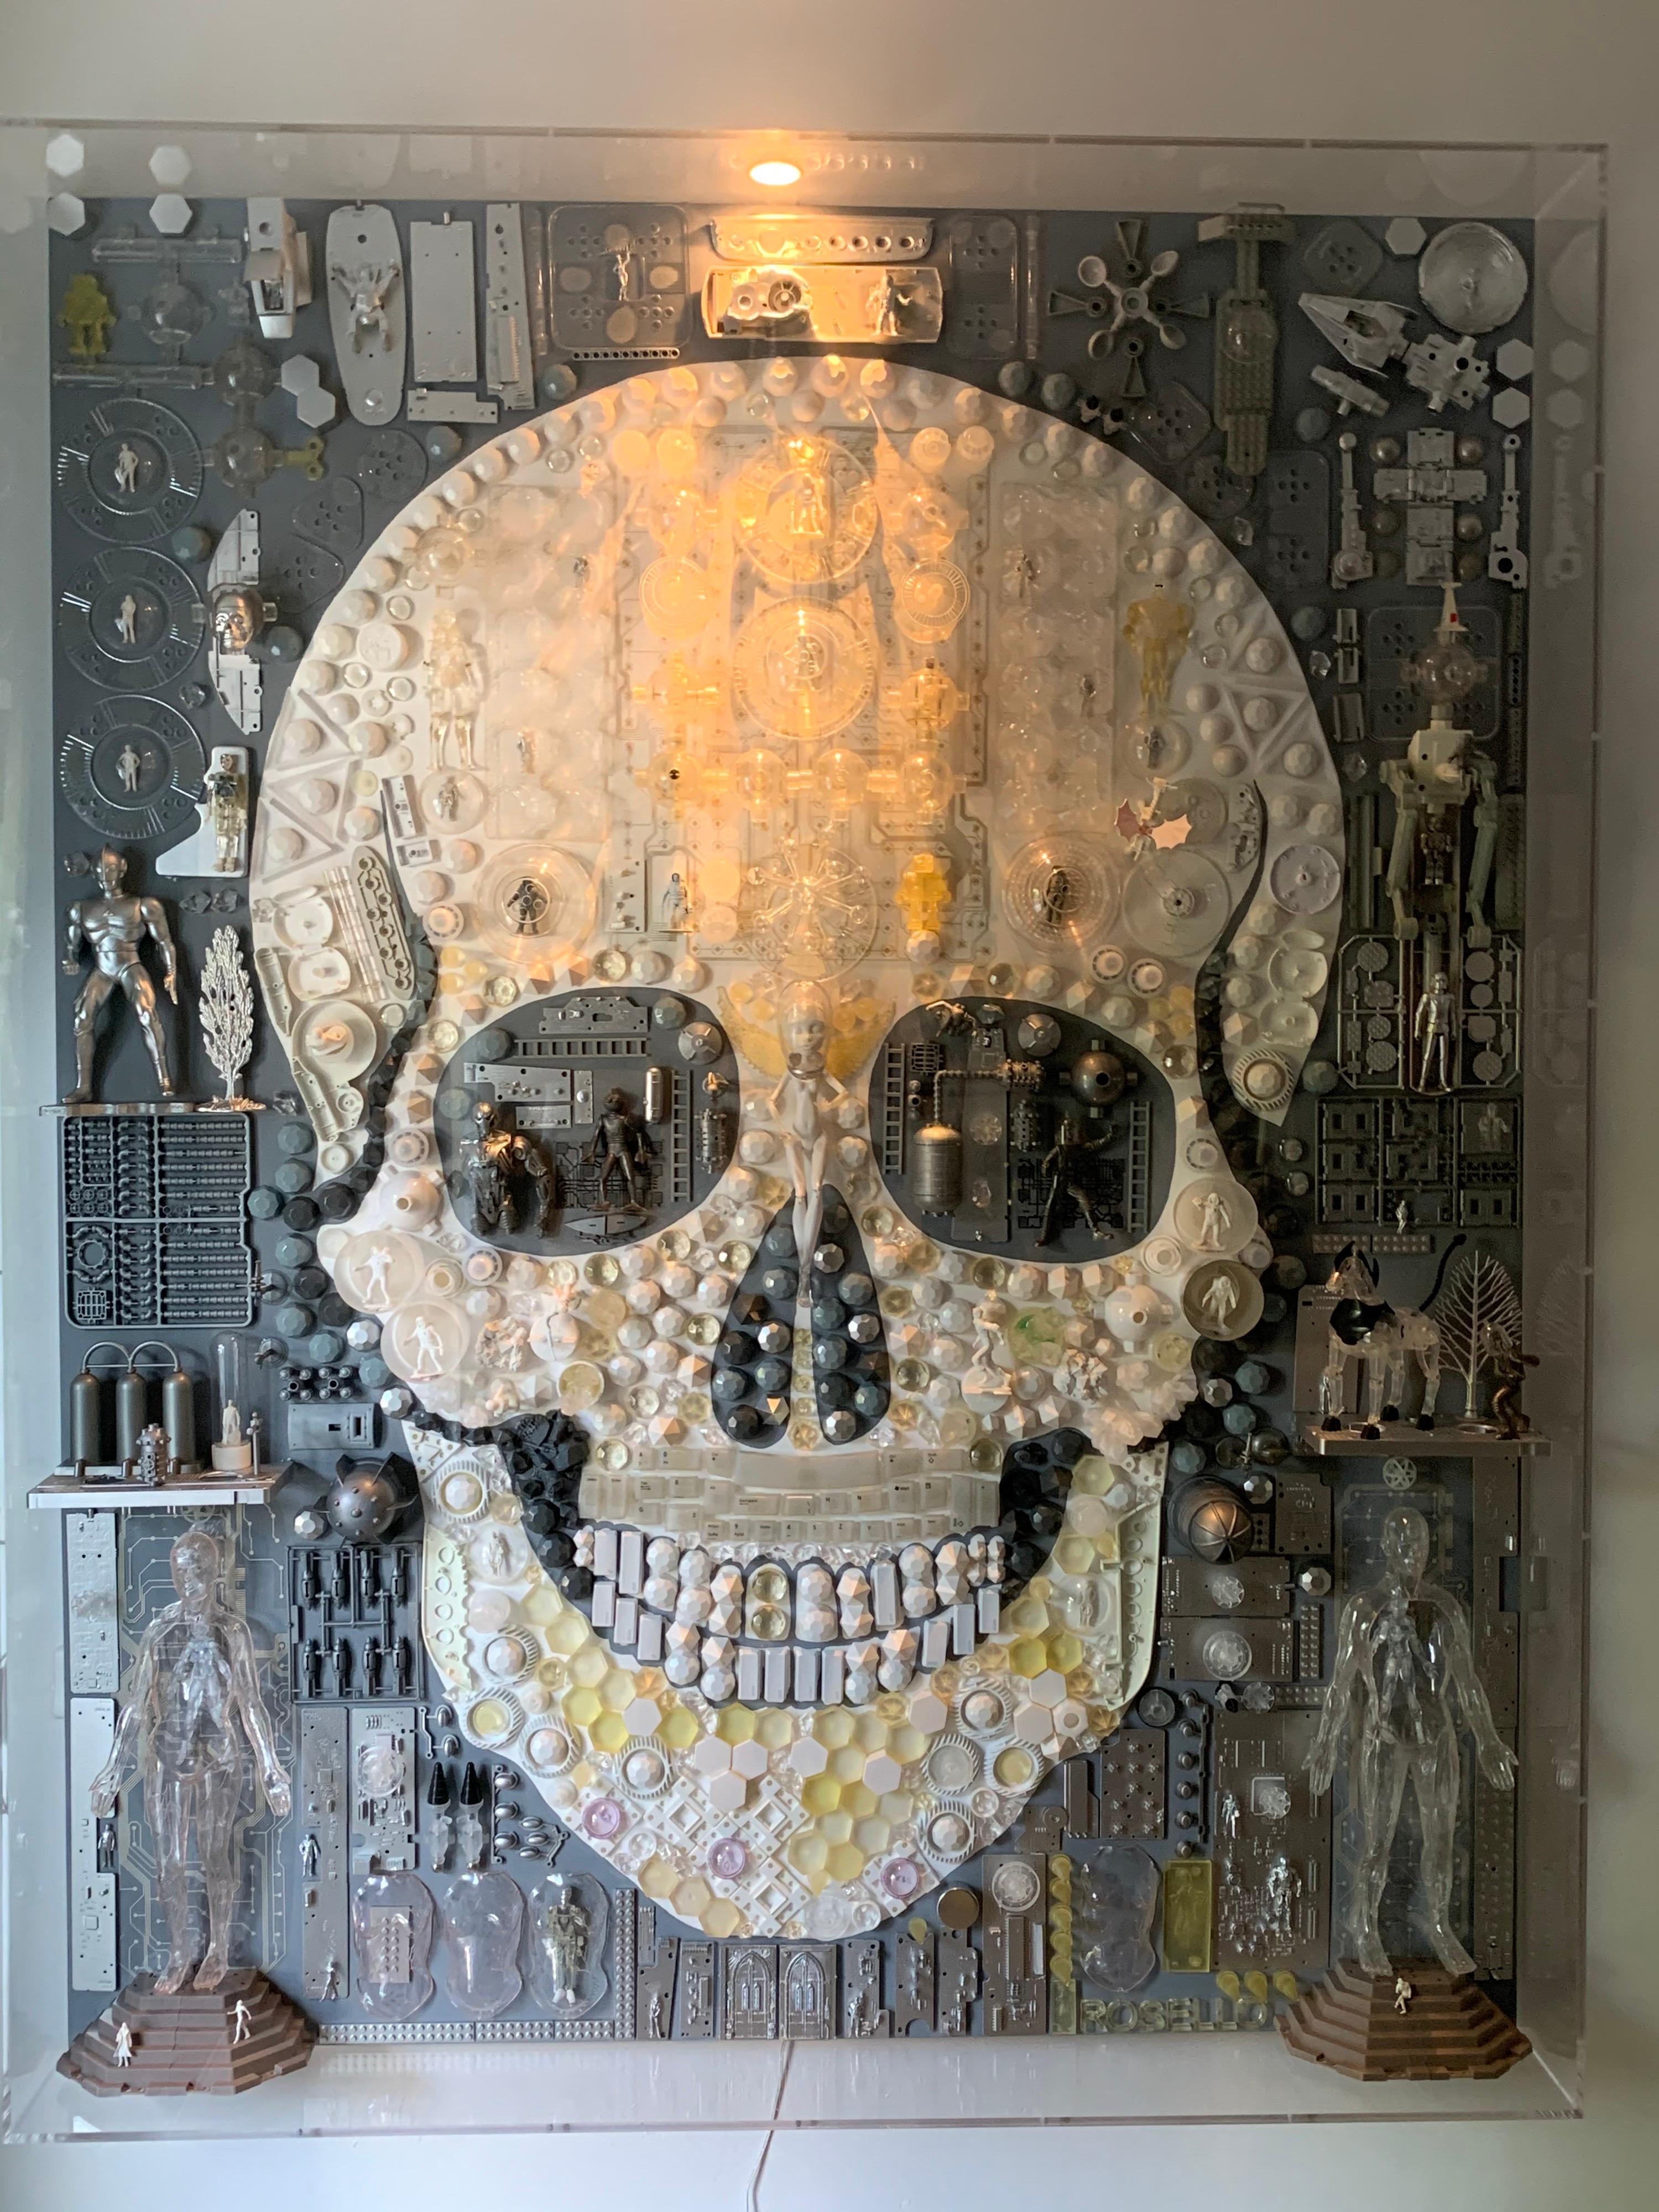 This is a one-of-a-kind large scale and super intricate collage of plastic found objects to create the image of a human skull. Whether up close or from a distance, this original art box in acrylic is a special and whimsical piece. You can stare at